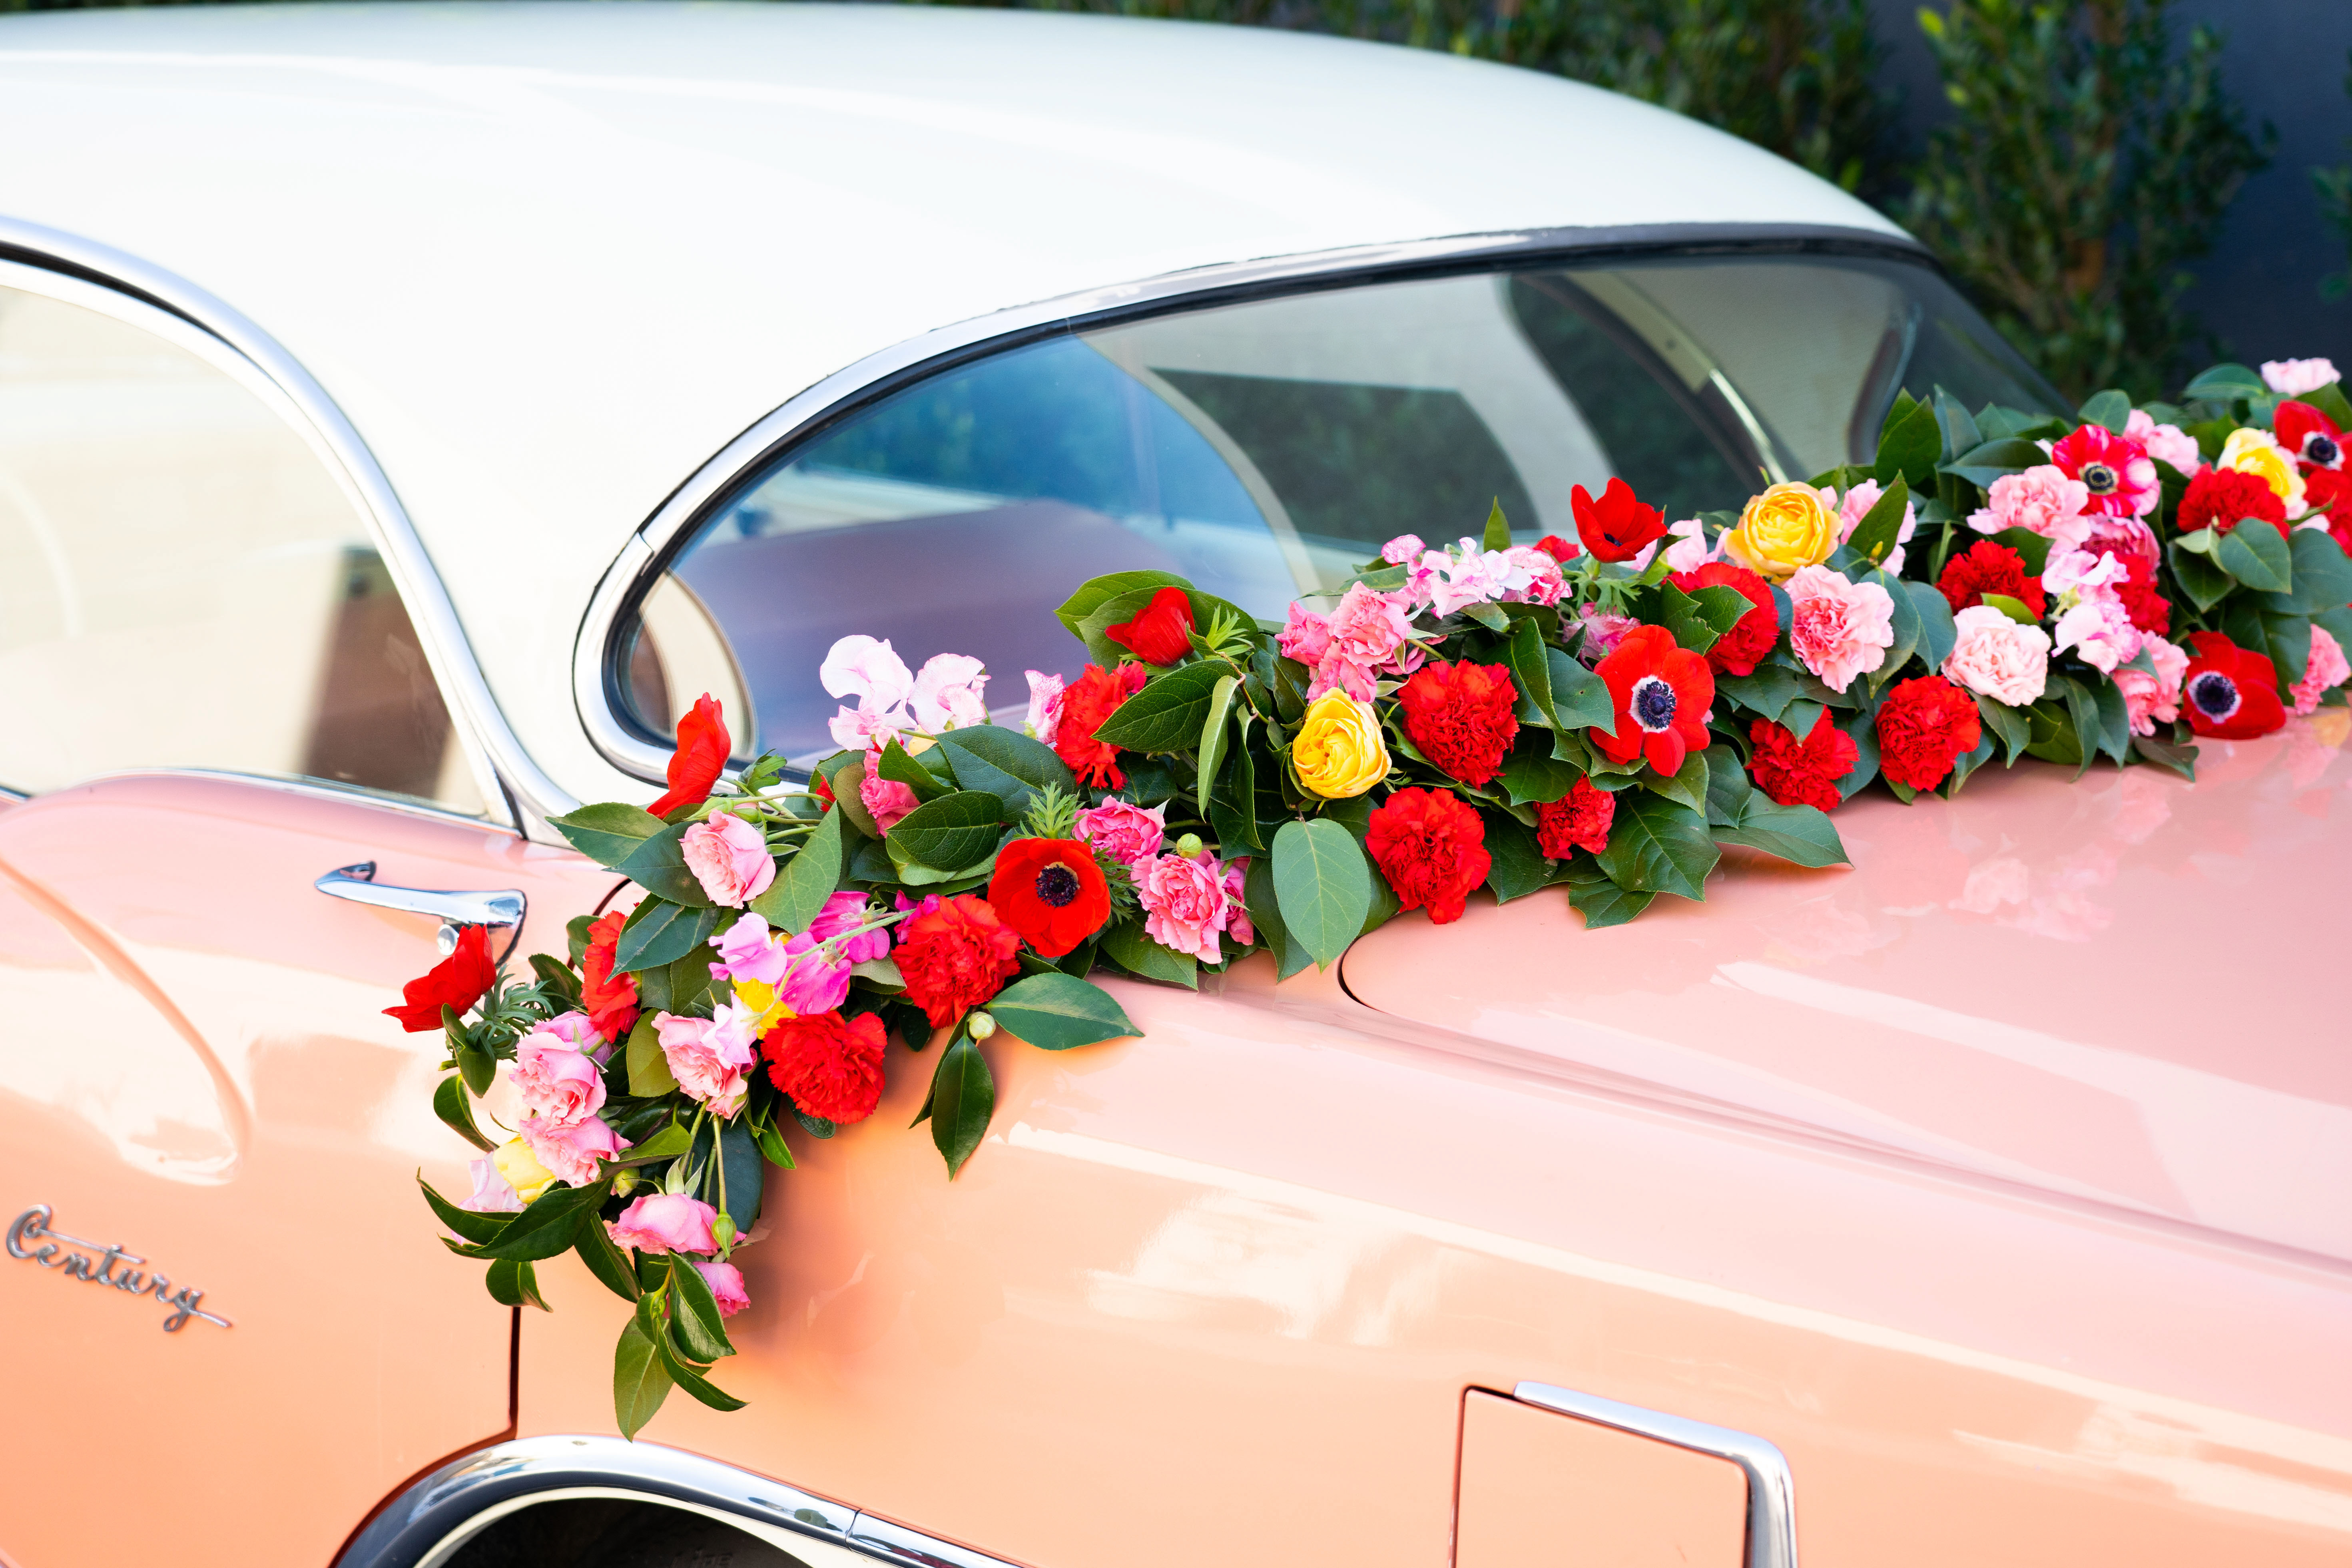 Our vibrant red, yellow, and pink garland adorning the couple's peach vintage getaway car.